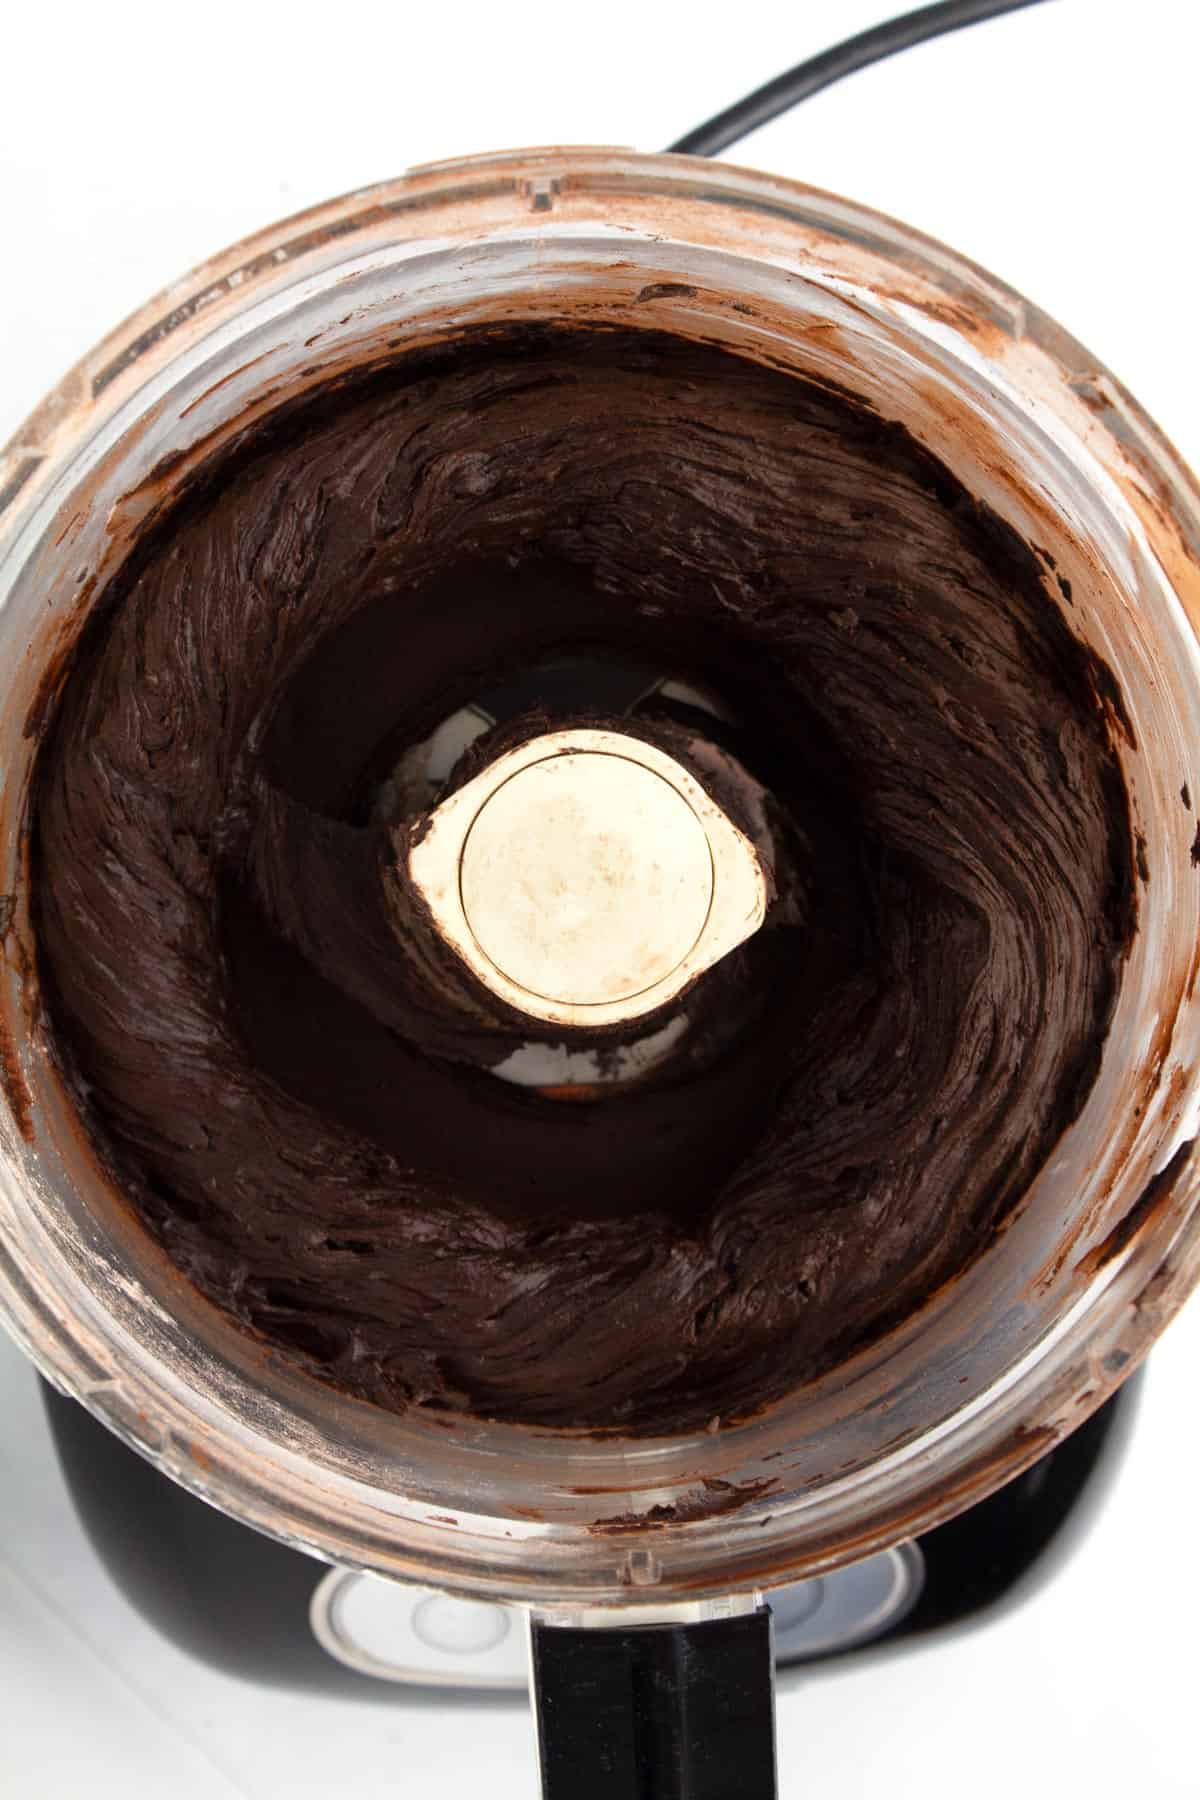 Chocolate frosting in a food processor after combining the first ingredients.